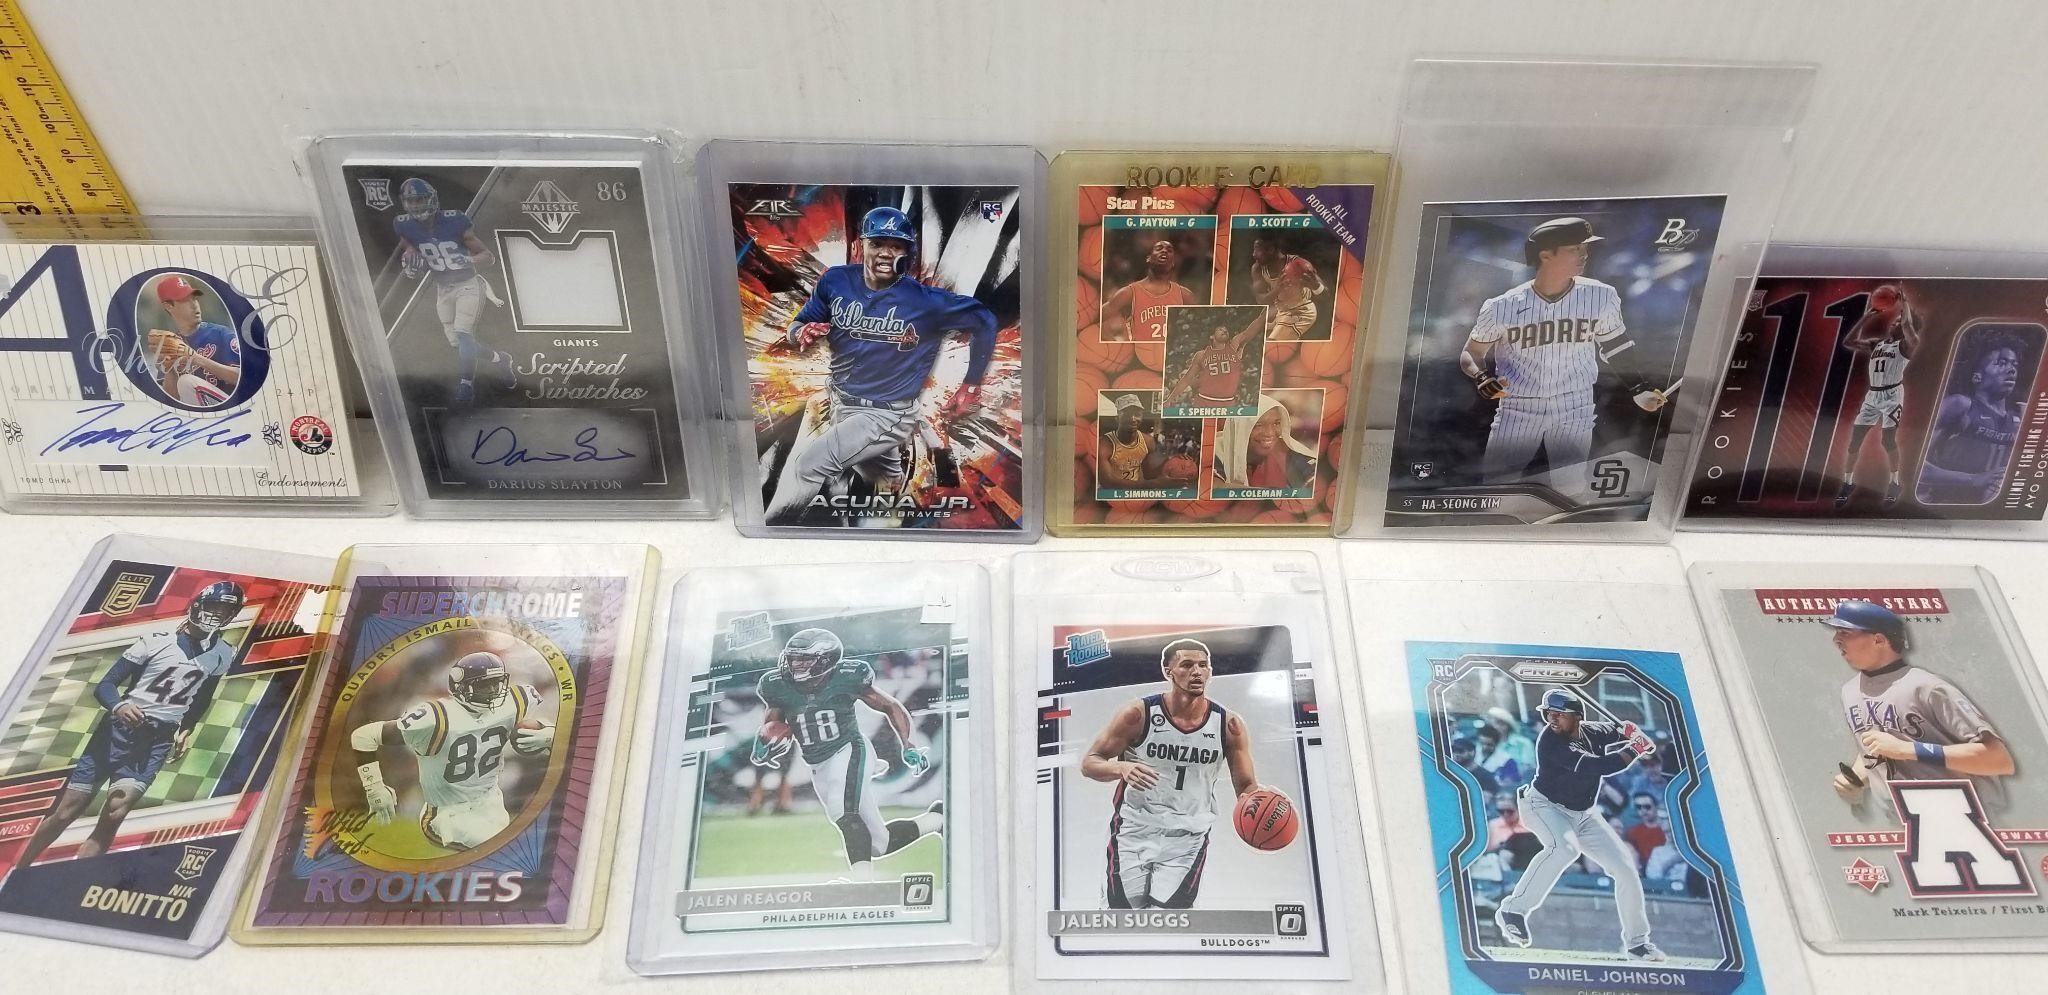 12 MISC NBA-MLB-NFL TRADING CARDS